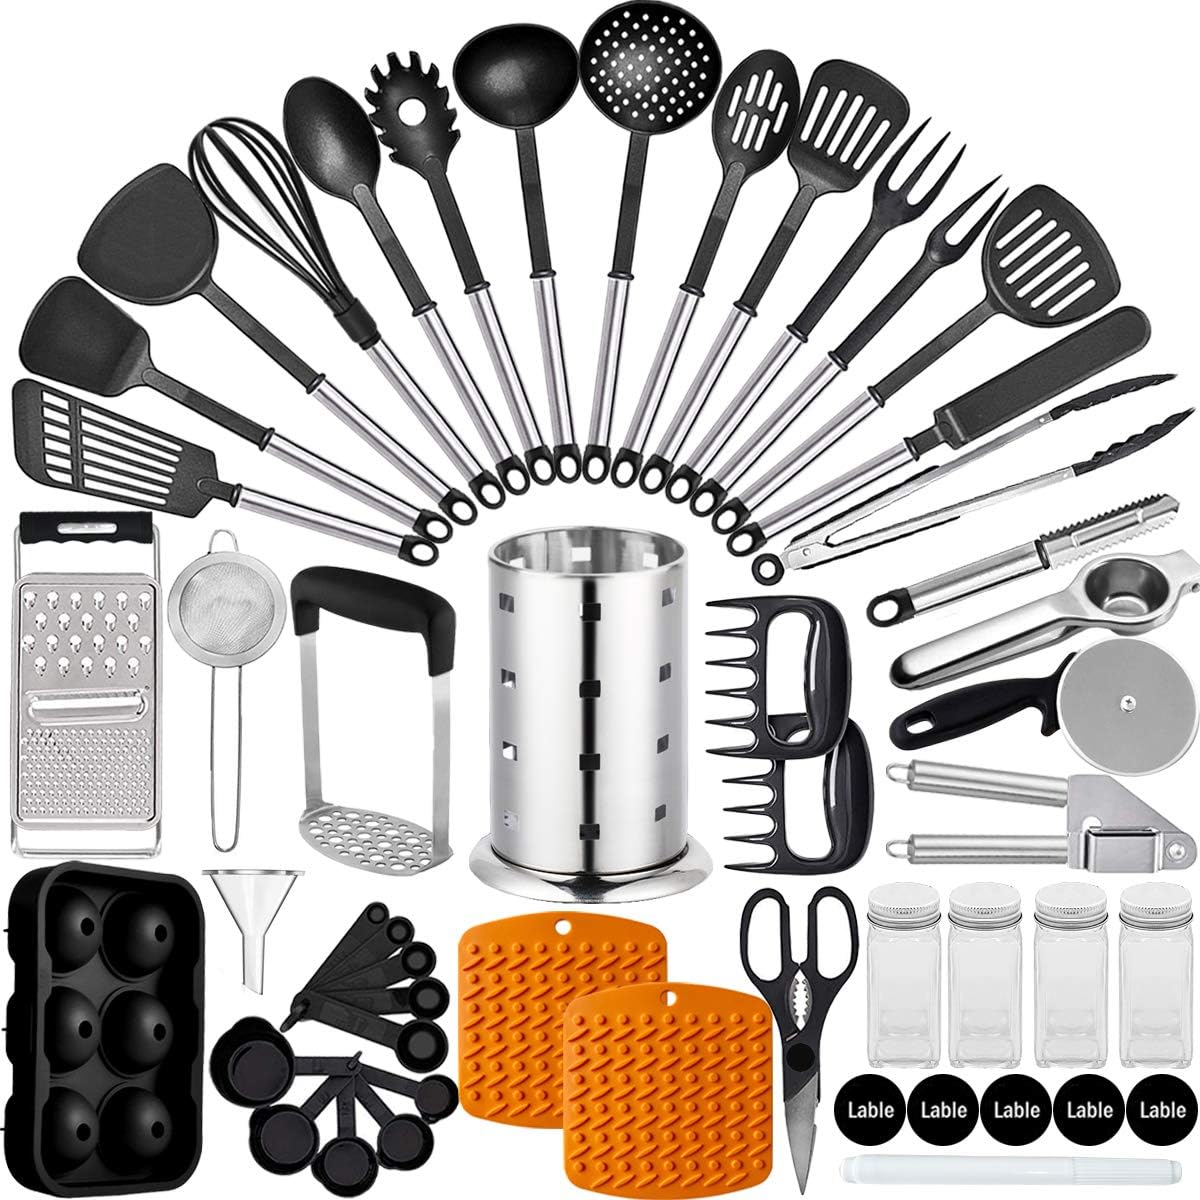 Artcome 25 Piece Kitchen Utensil Set Nylon and Stainless Steel Cooking  Utensils Set with Utensil Holder Spatula Spoon Tongs Whisk Cookware Set  Kitchen ...